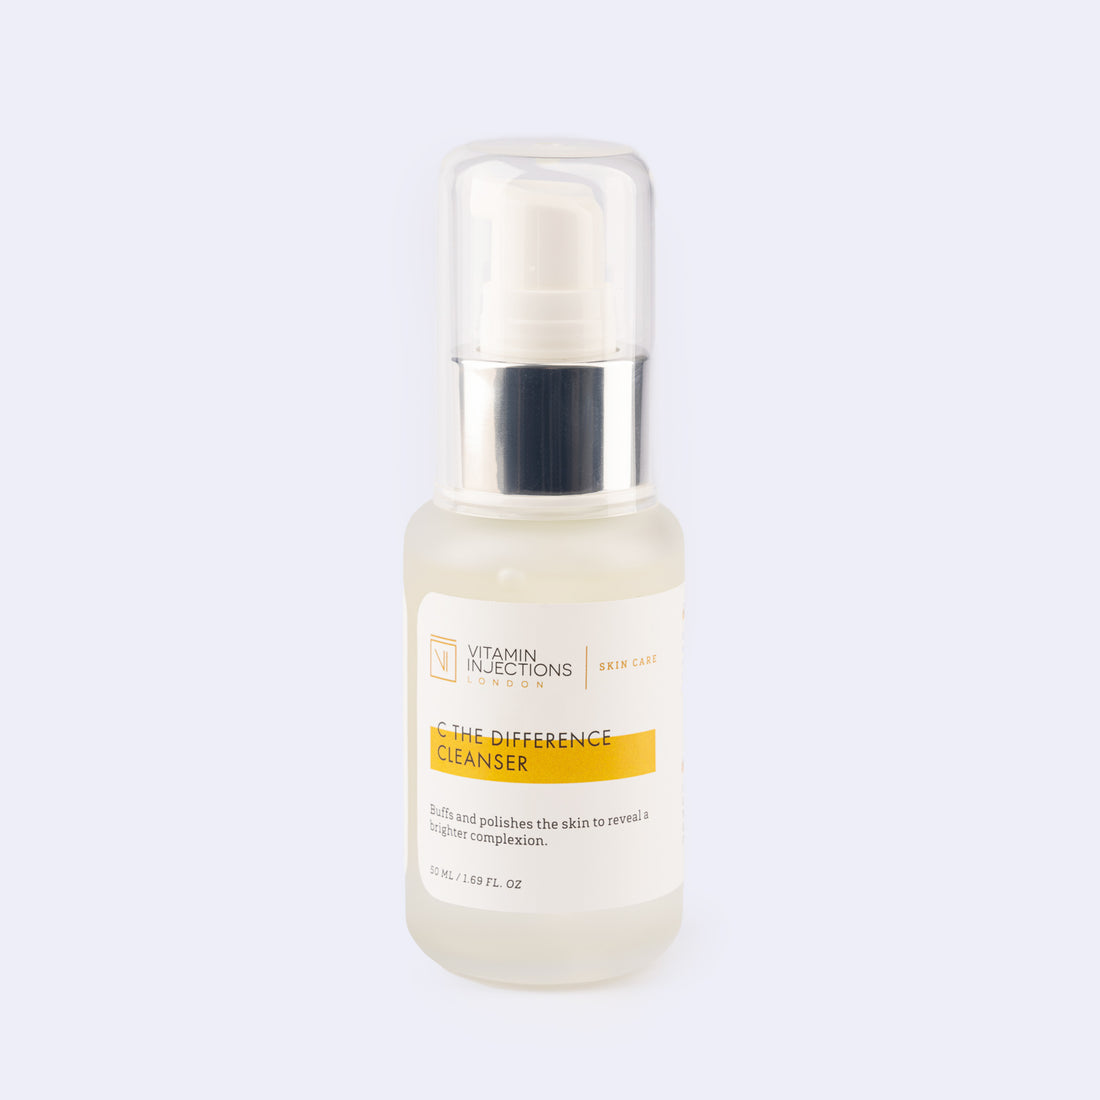 C The Difference Vitamin C Cleanser